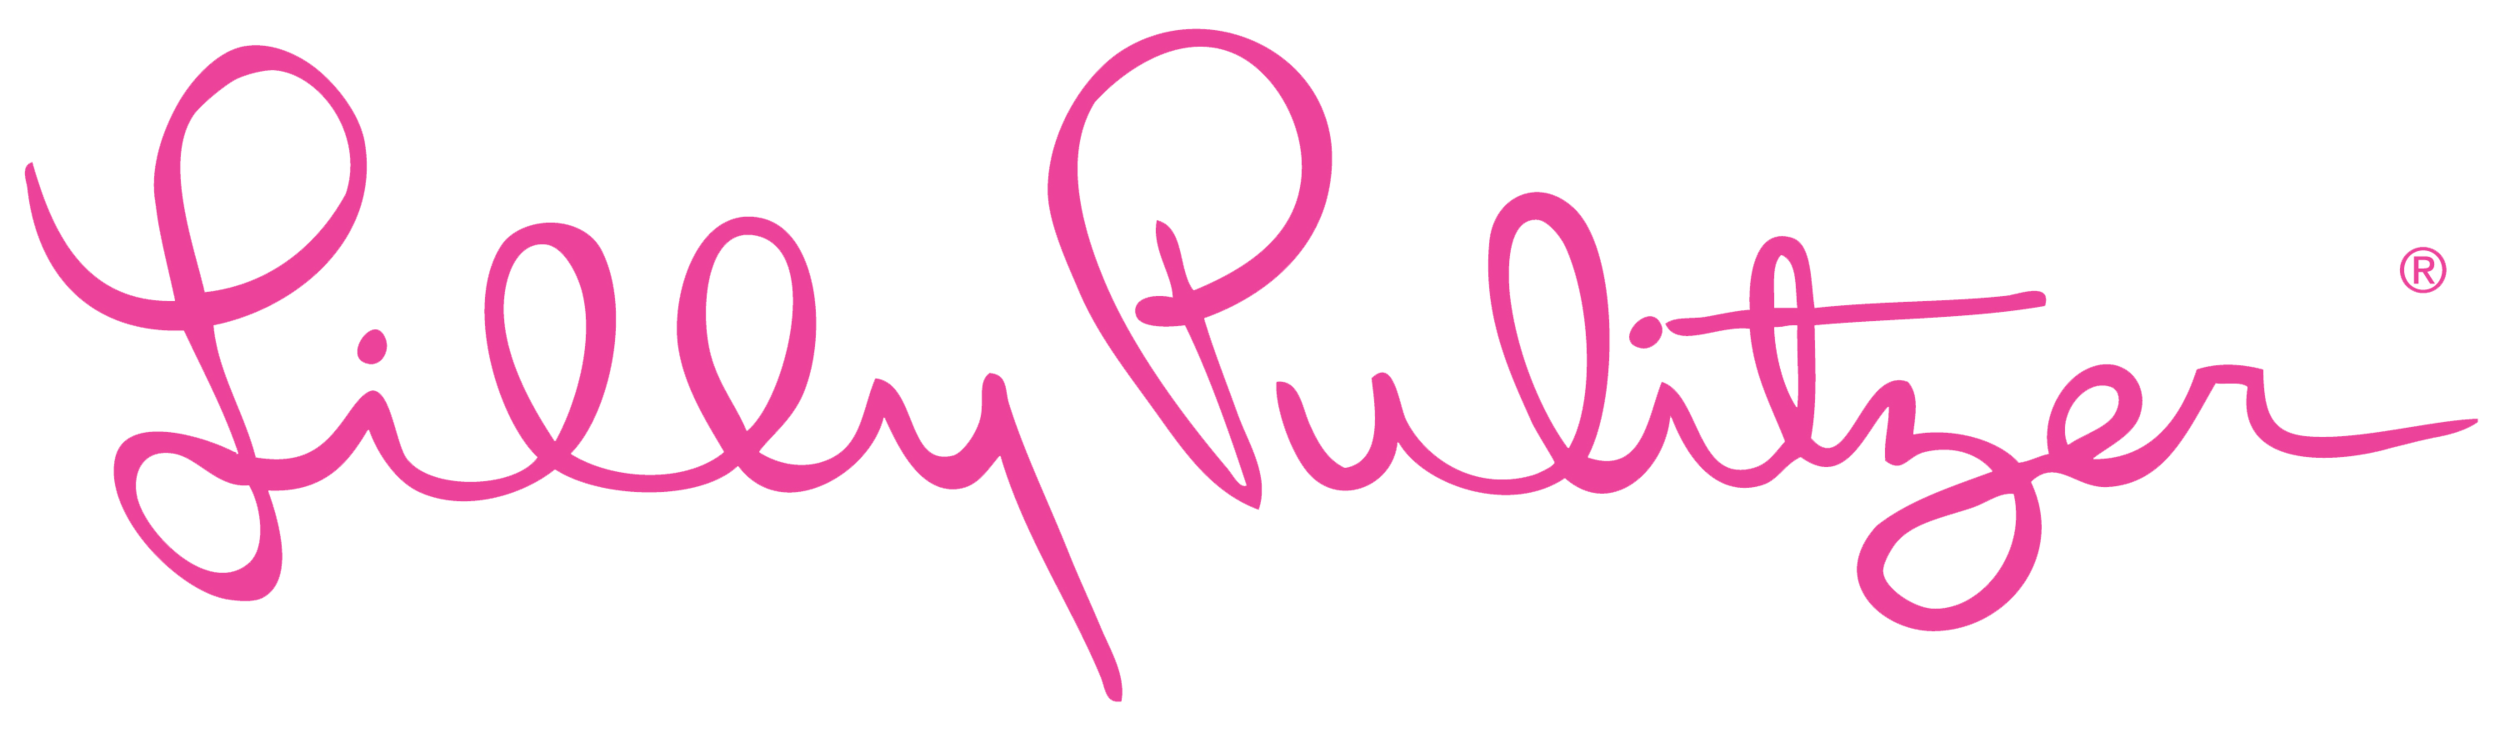 Lilly-Pulitzer-Logo.png